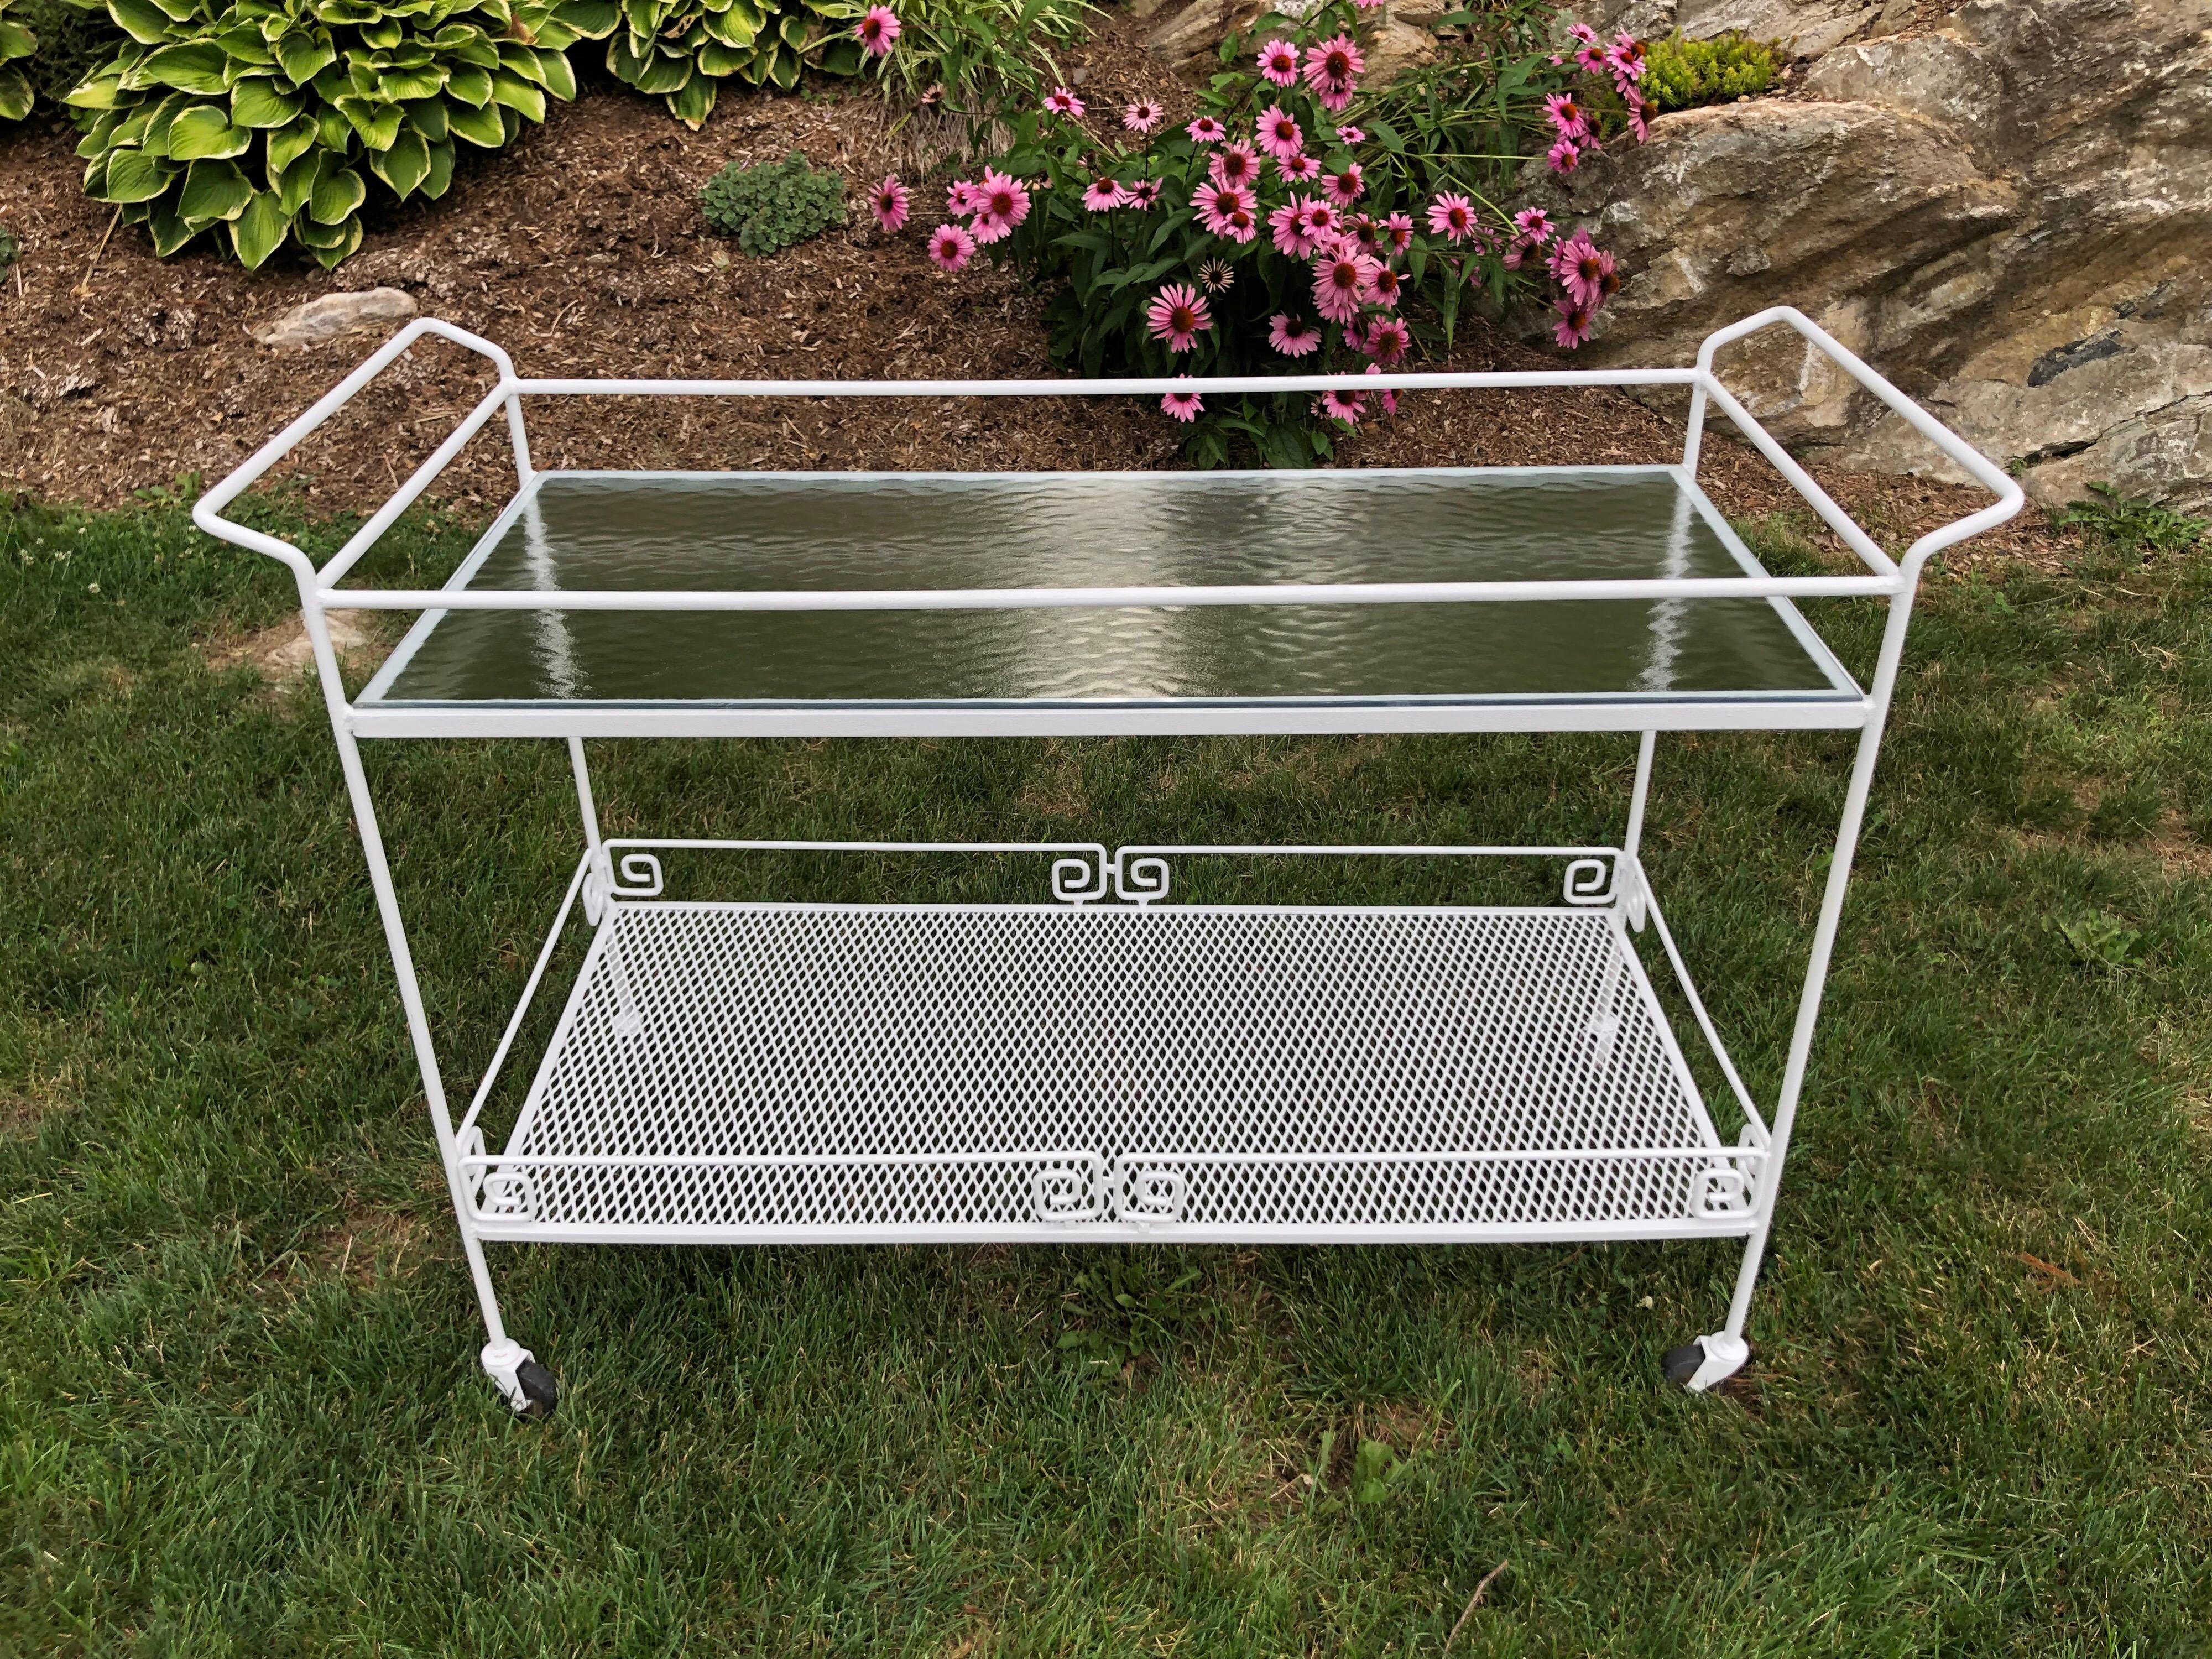 Salterini for Woodard Greek two tiered key bar cart. Perfect for entertaining. Easy to move with its nice castors. Freshly repainted in white. Original tempered glass top and weaved metal lower shelf. Nice size for a great party on the patio. We